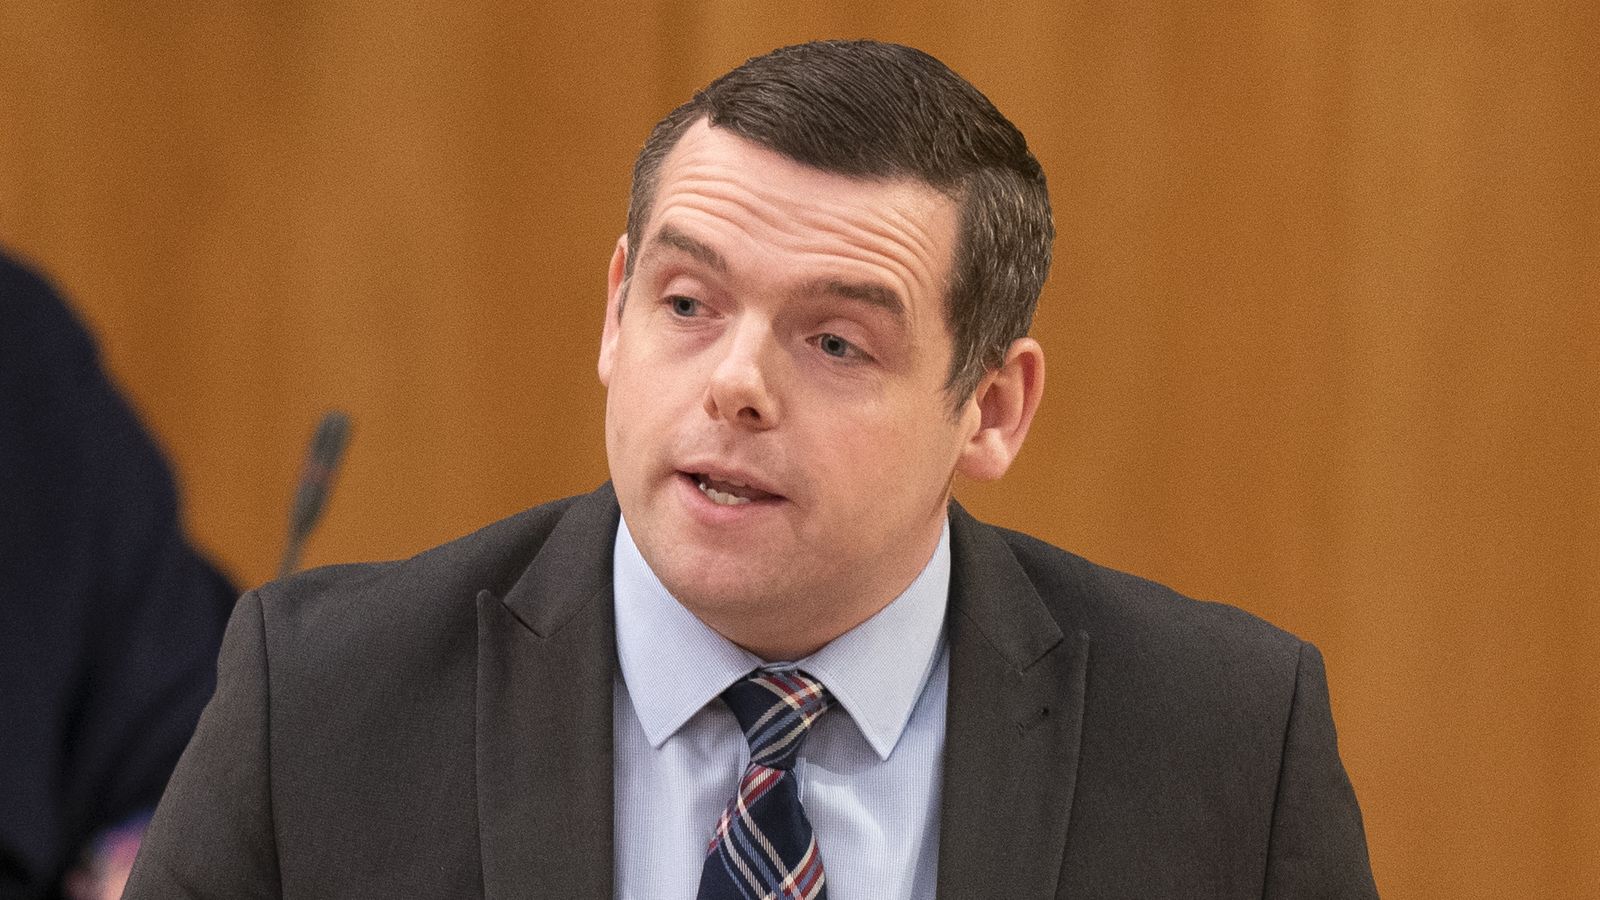 Scottish Tory leader Douglas Ross further muddies the waters after tactical voting comments